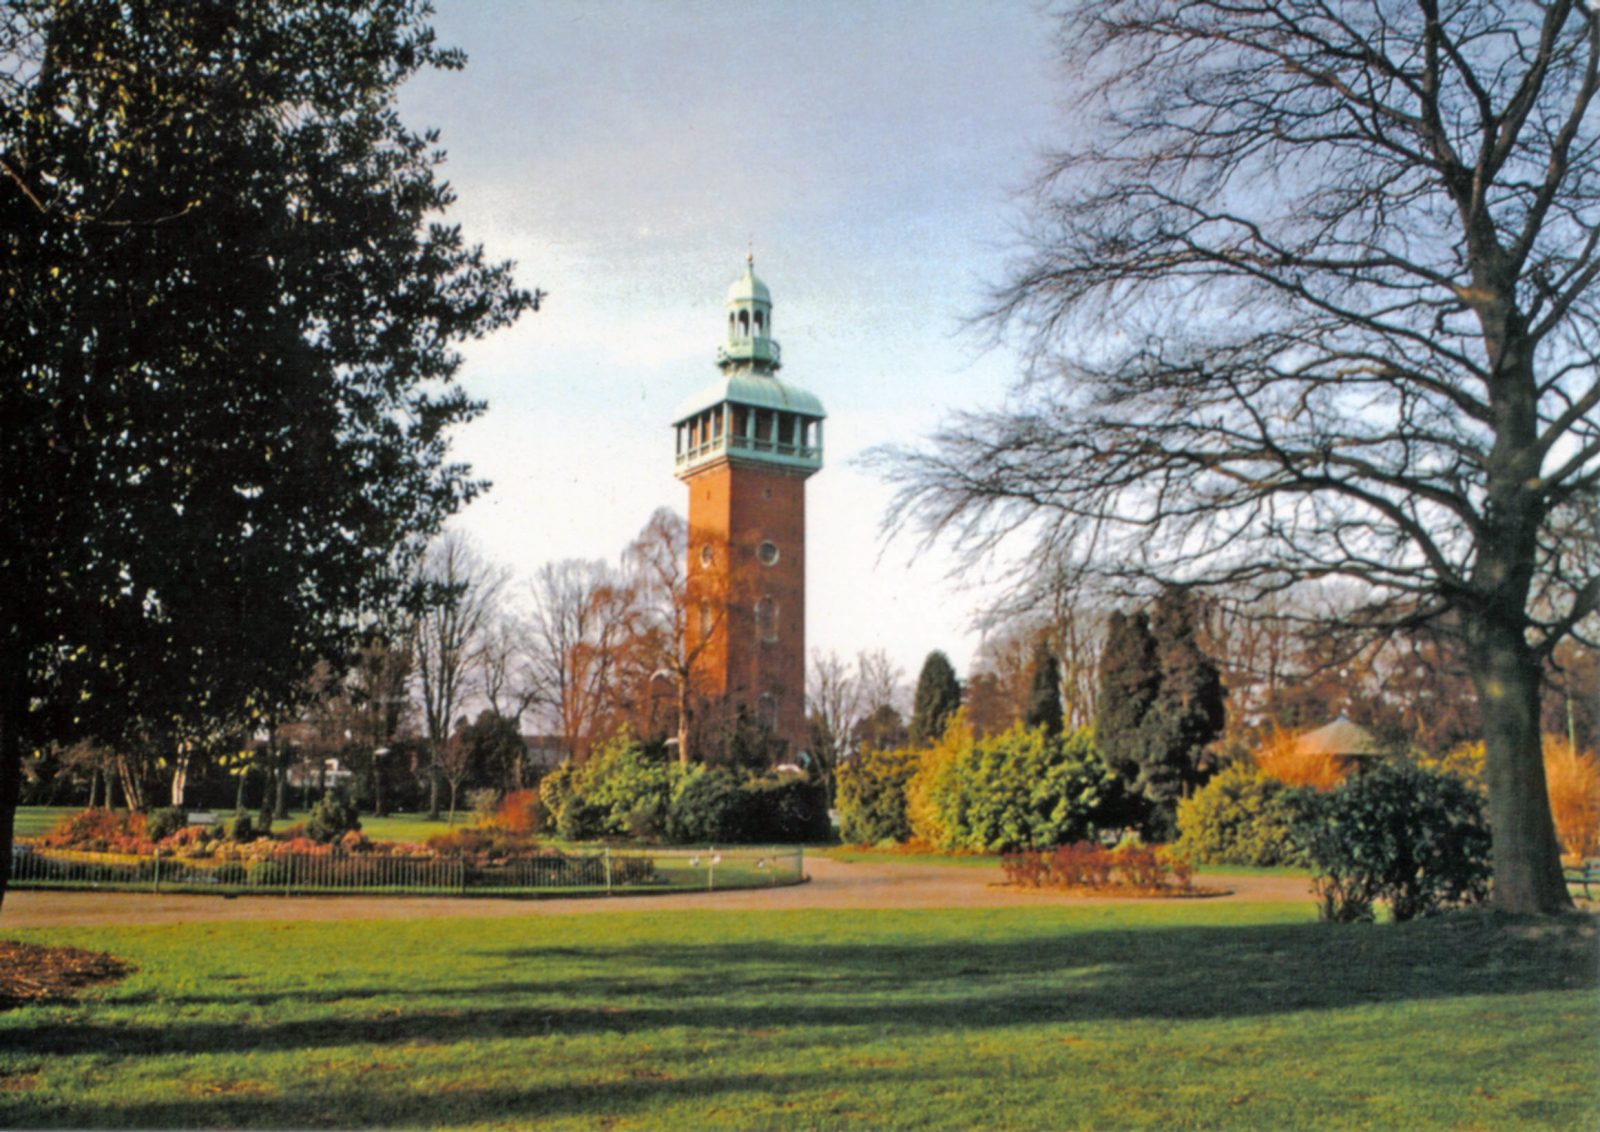 Queens Park, Loughborough. Post 1960: Looking across informal beds to Carillon Tower. (File:1141)